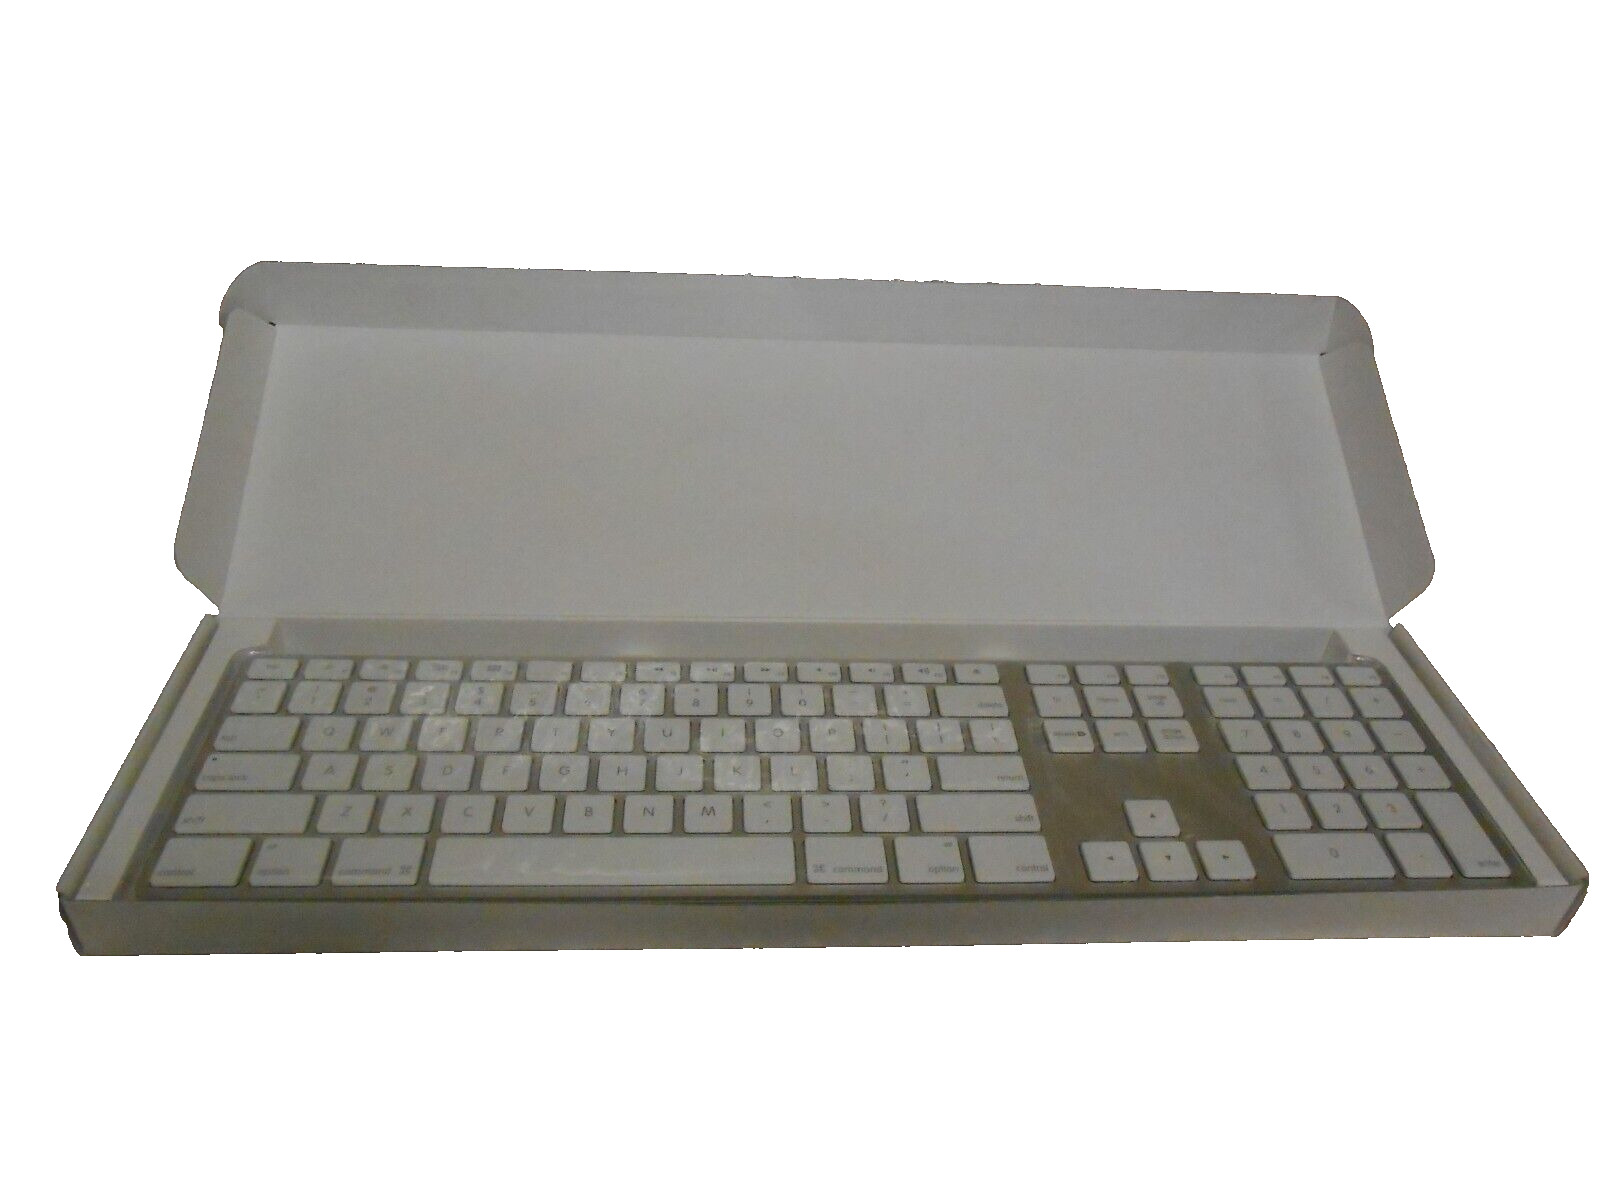 Apple Wired Keyboard with USB - A1243 MB110LL/B